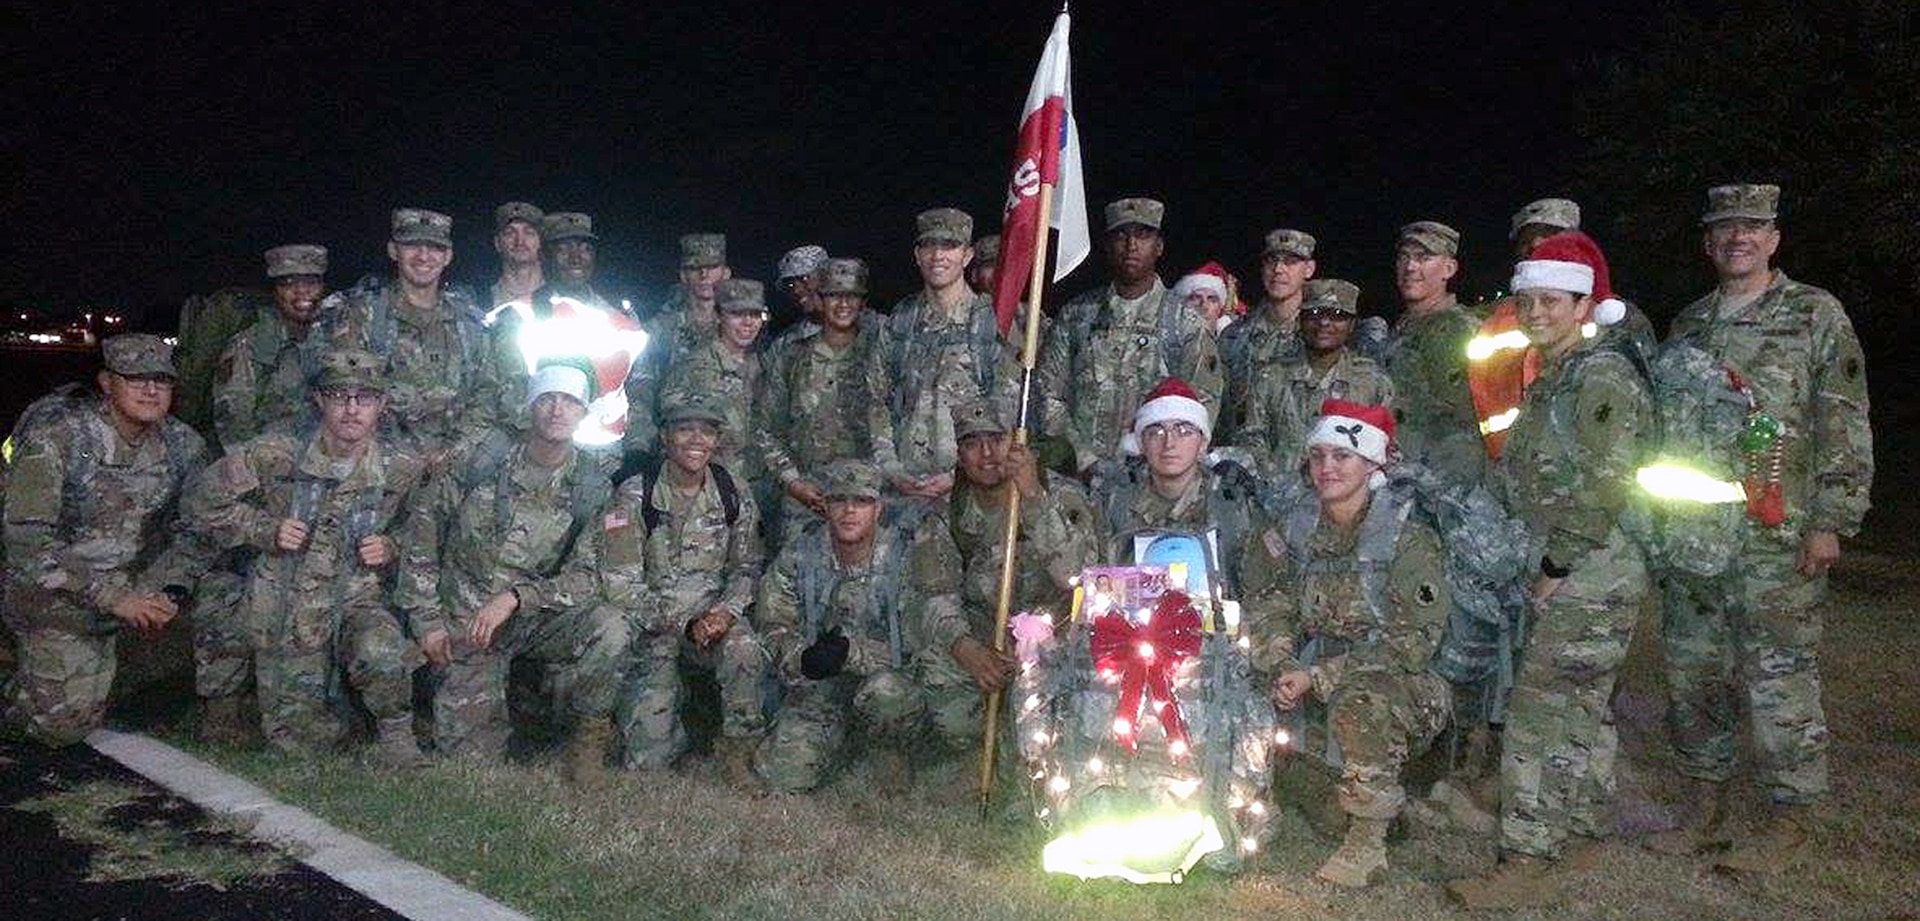 Soldiers from the U.S. Army South Headquarters Support Company gathered early Dec. 14 at the MacArthur Parade Field and stuffed lots of toys and goodies into their ruck sacks before heading off on a three-mile road march Joint Base San Antonio-Fort Sam Houston Child Development Center.